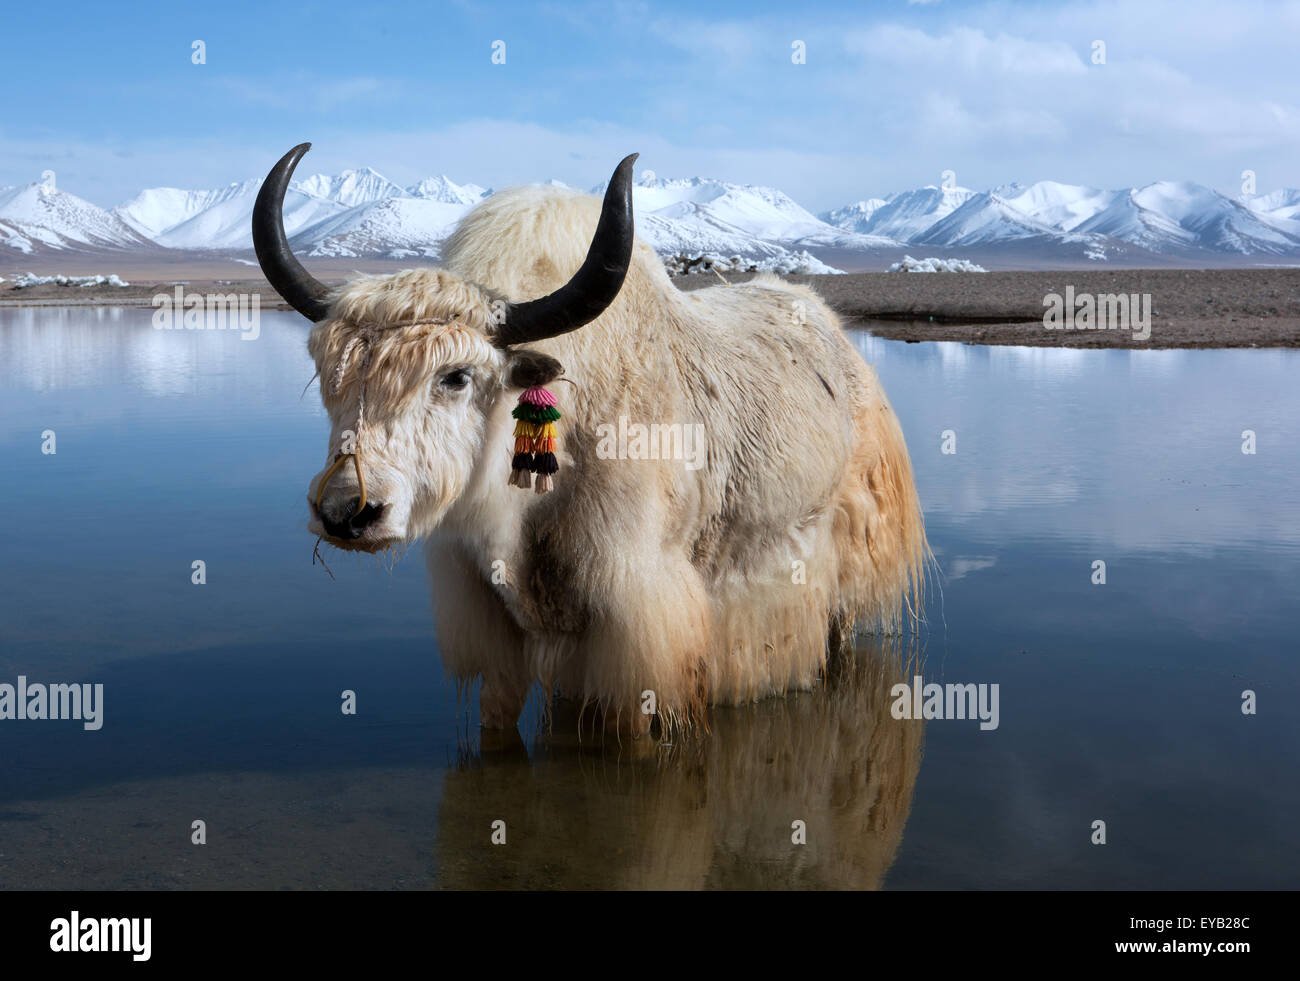 Native To Tibet High Resolution Stock Photography and Images - Alamy